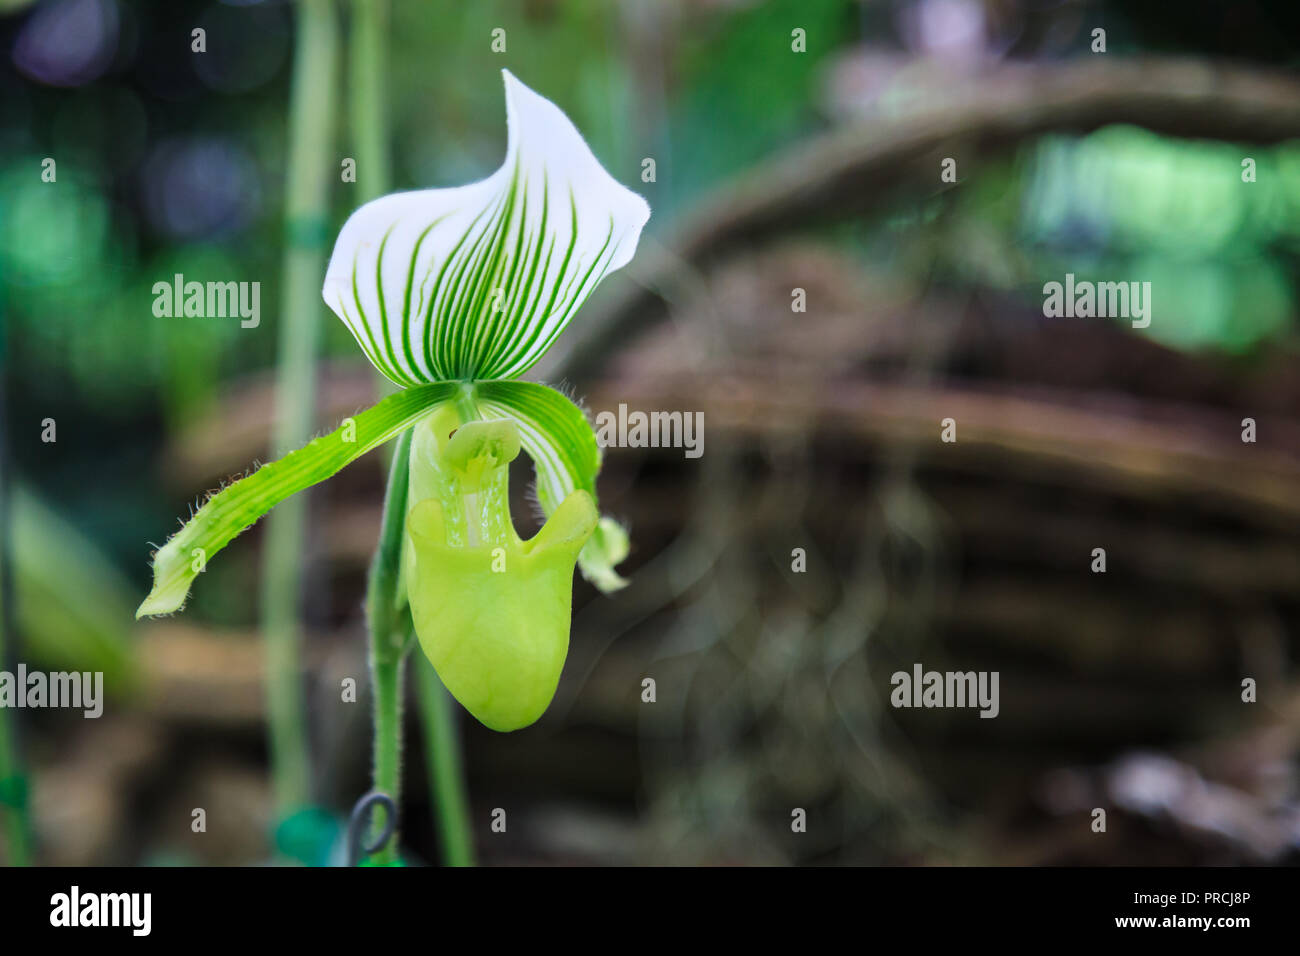 Flowers: Lady's slipper, lady slipper or slipper orchid Paphiopedilum, Paphiopedilum Hennisianum. The slipper-shaped lip of the flower serves as a tra Stock Photo